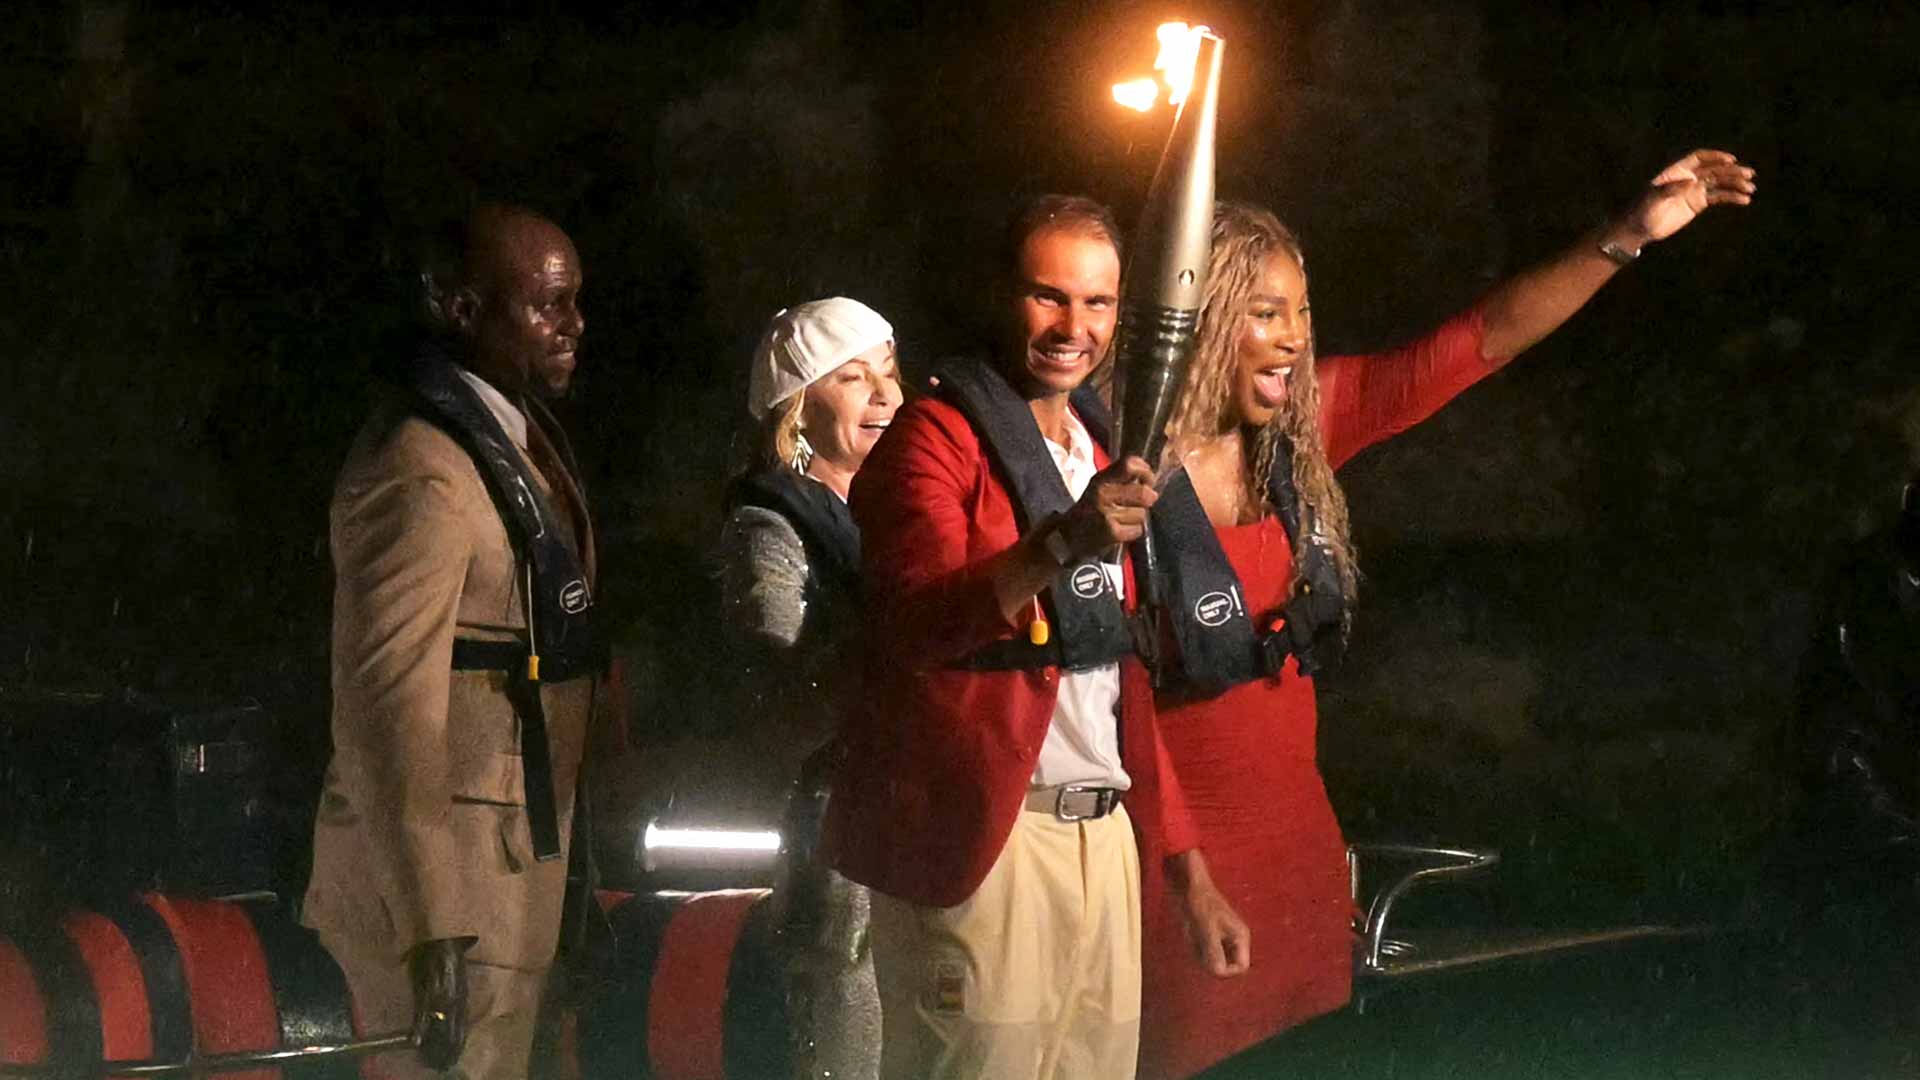 Rafael Nadal carries to Olympic torch on a boat on the Seine River alongside Serena Williams, Carl Lewis and Nadia Comaneci.